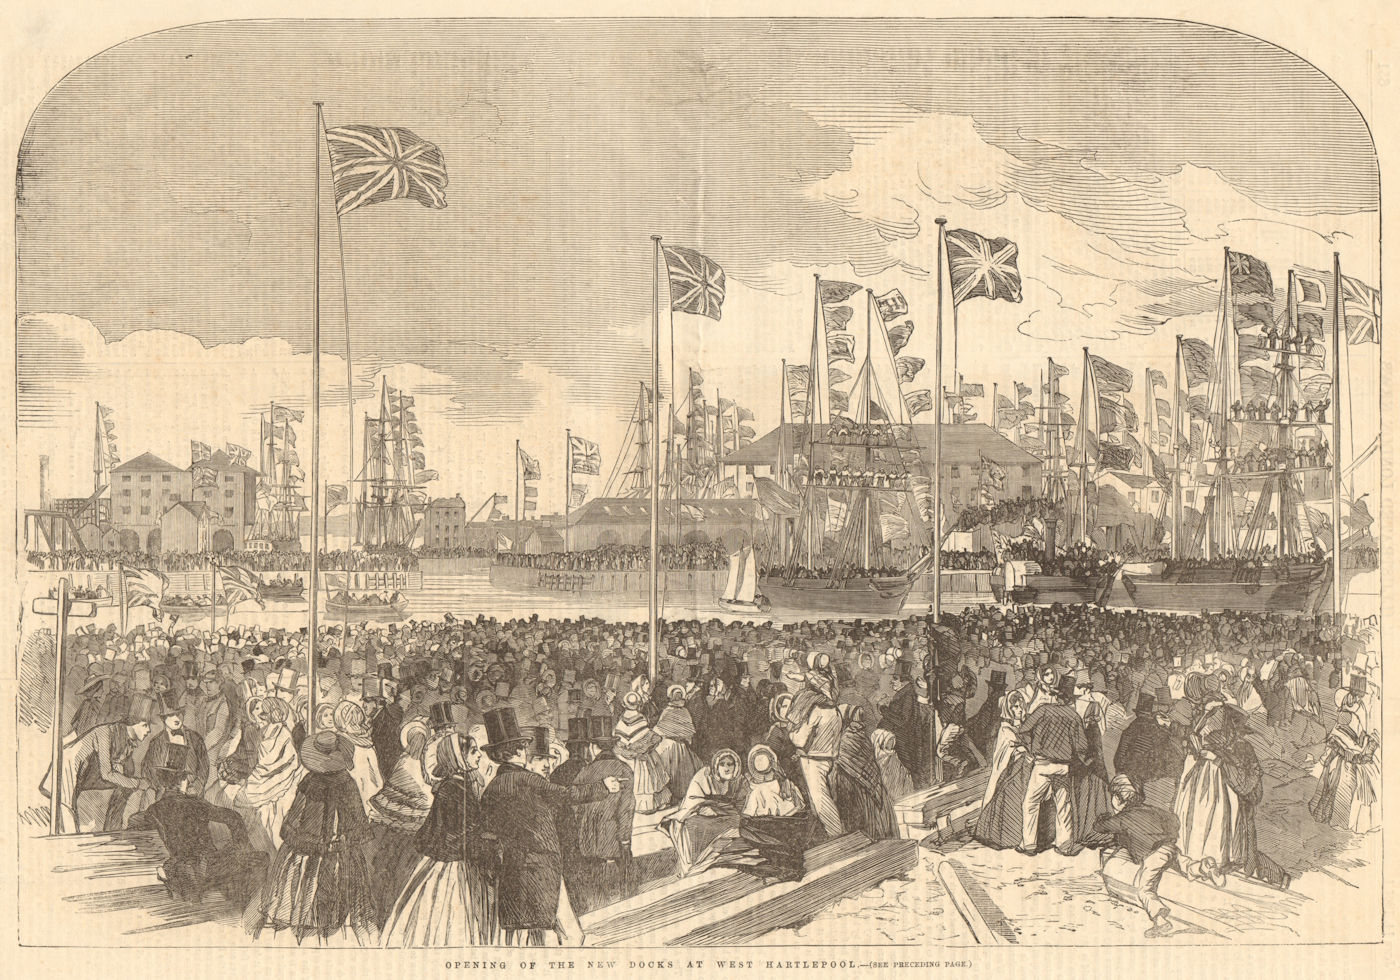 Opening of the new docks at west Hartlepool. Durham. Ports 1856 old print